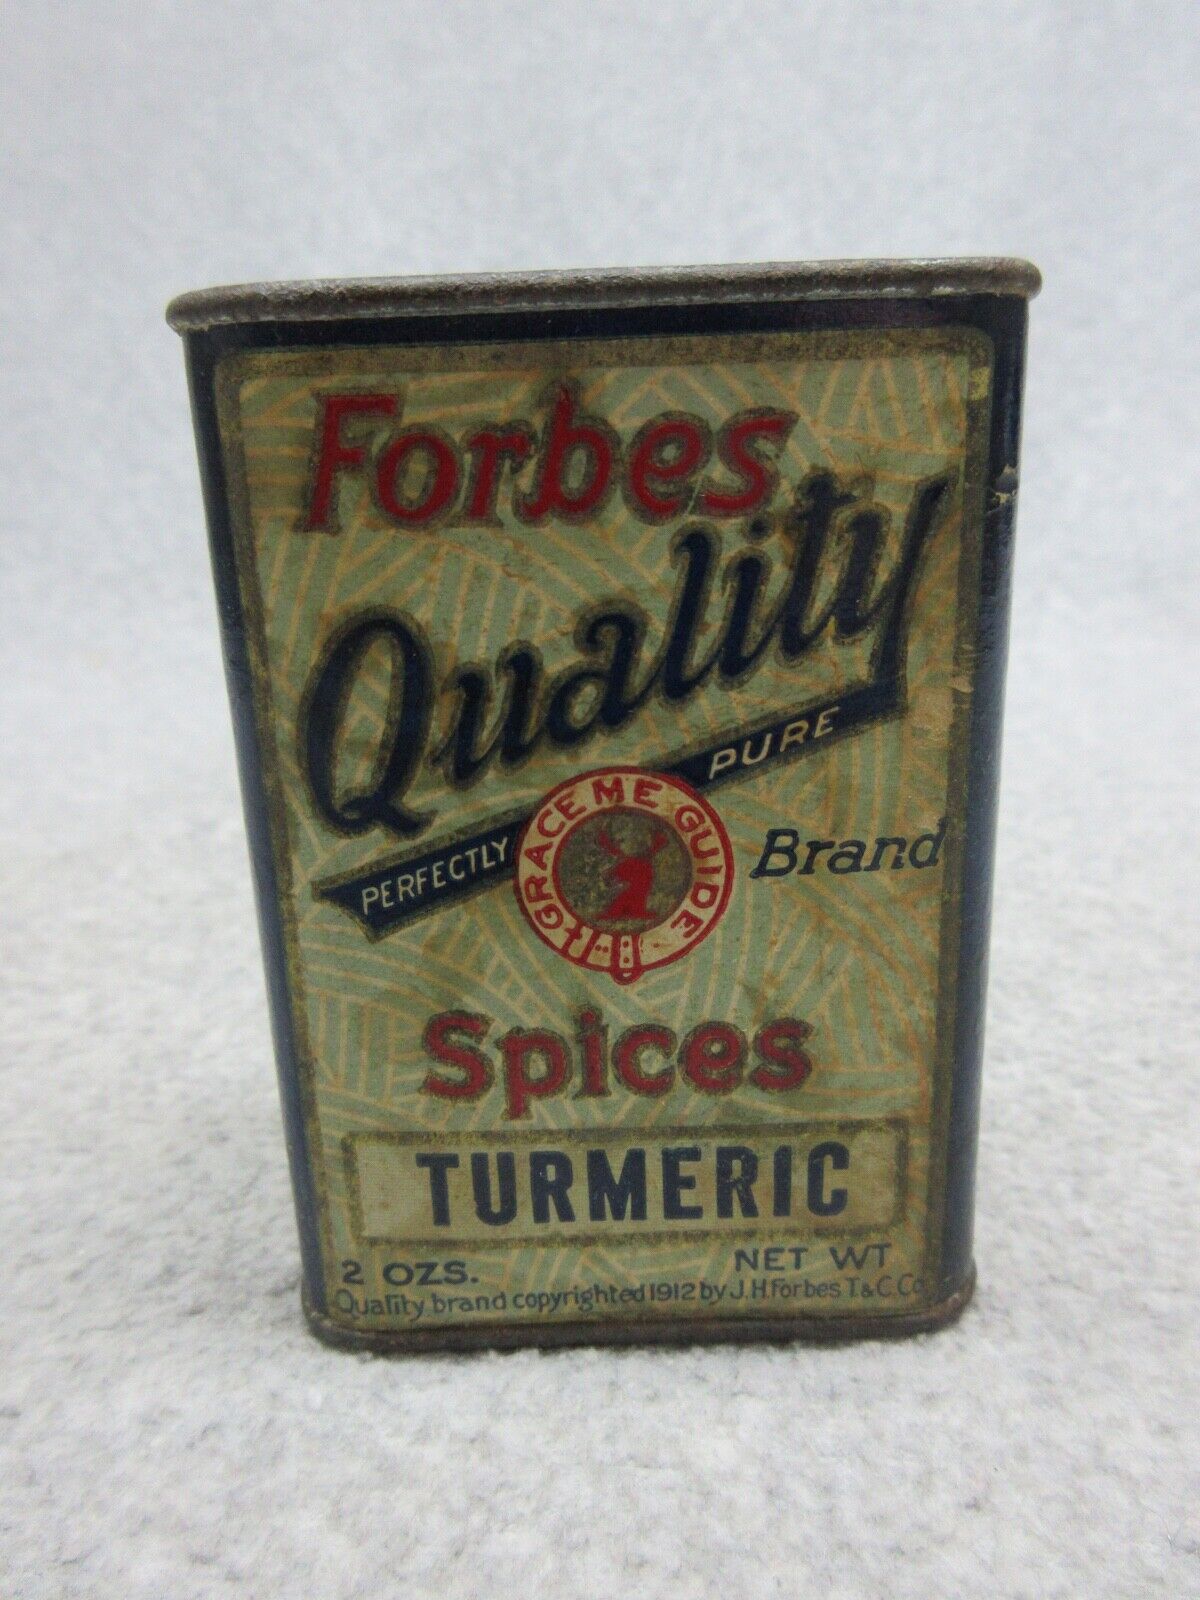 1912 FORBES Turmeric 2 Ounce SPICE TiN, Cardboard Label EXCELLENT  St Louis Mo